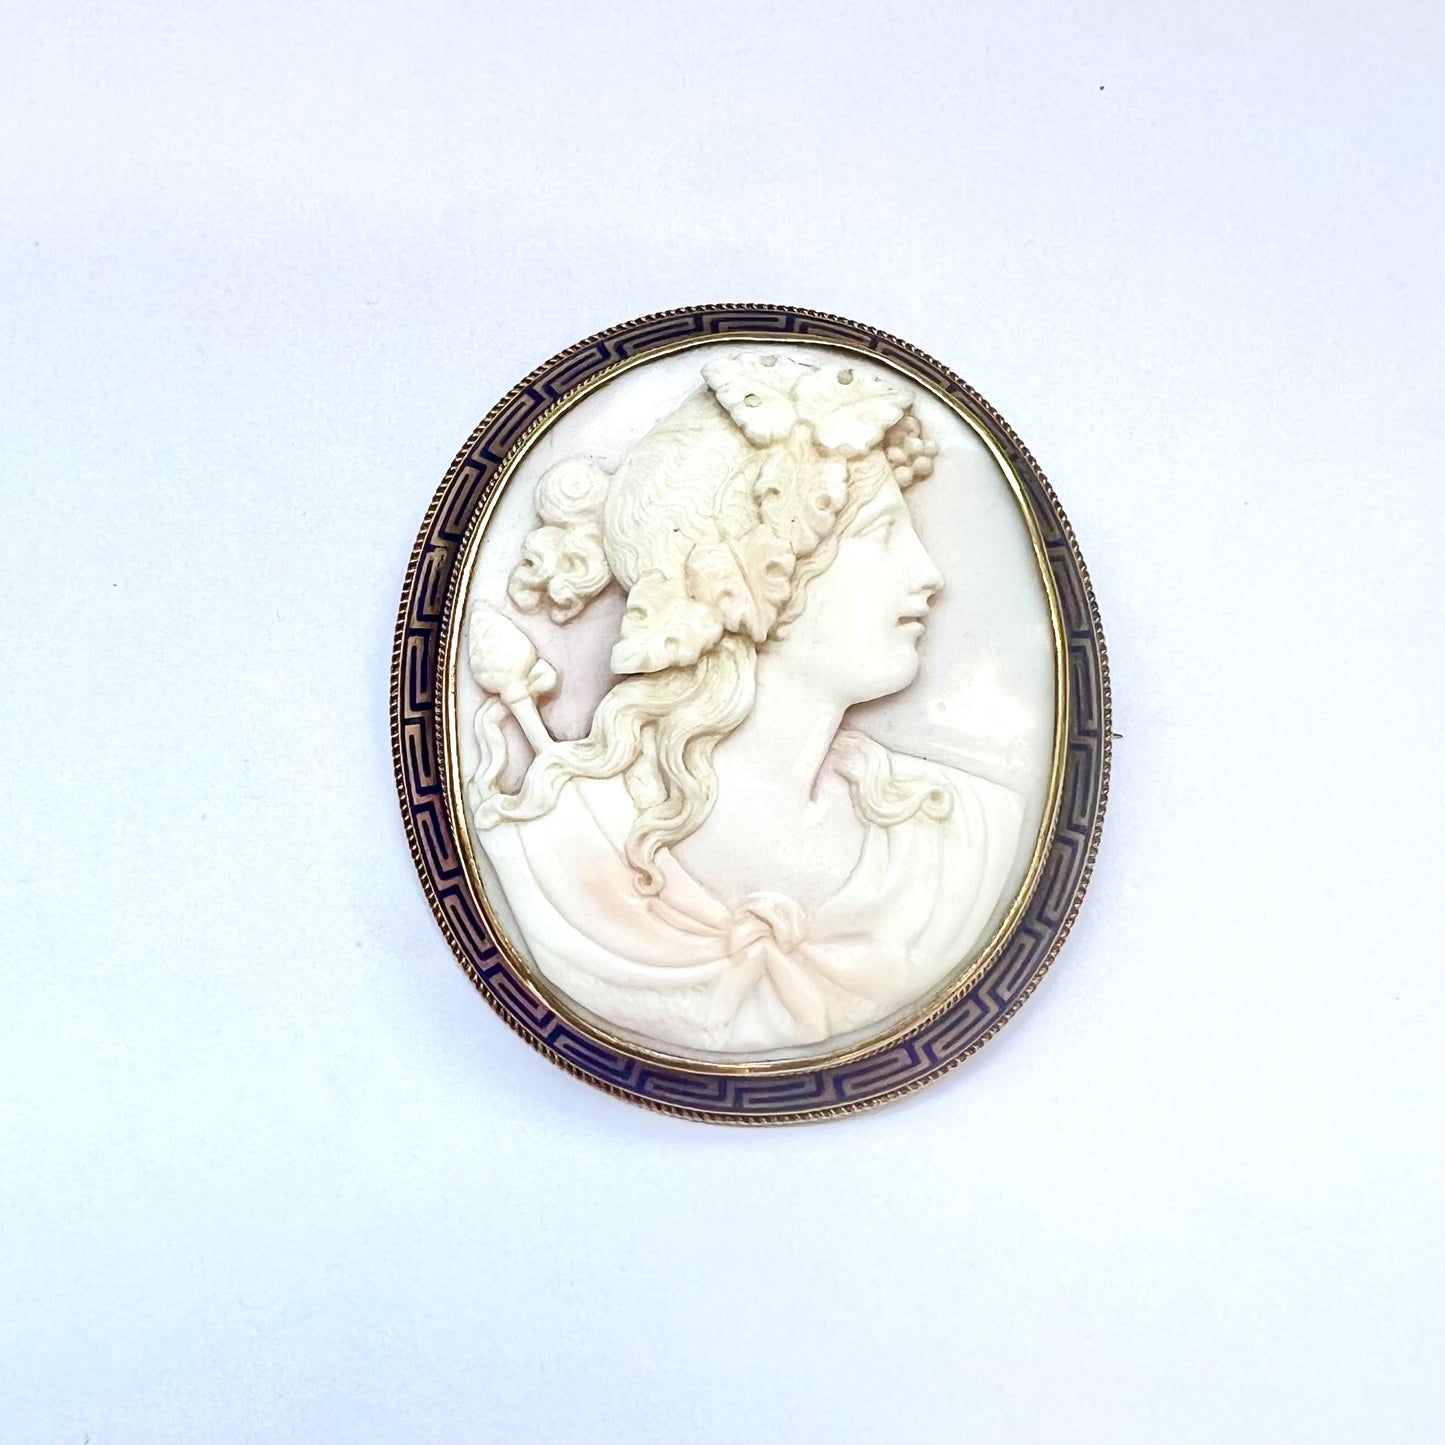 Superb and rare High Victorian Tessier gold and shell cameo mourning brooch with blue enamelled border